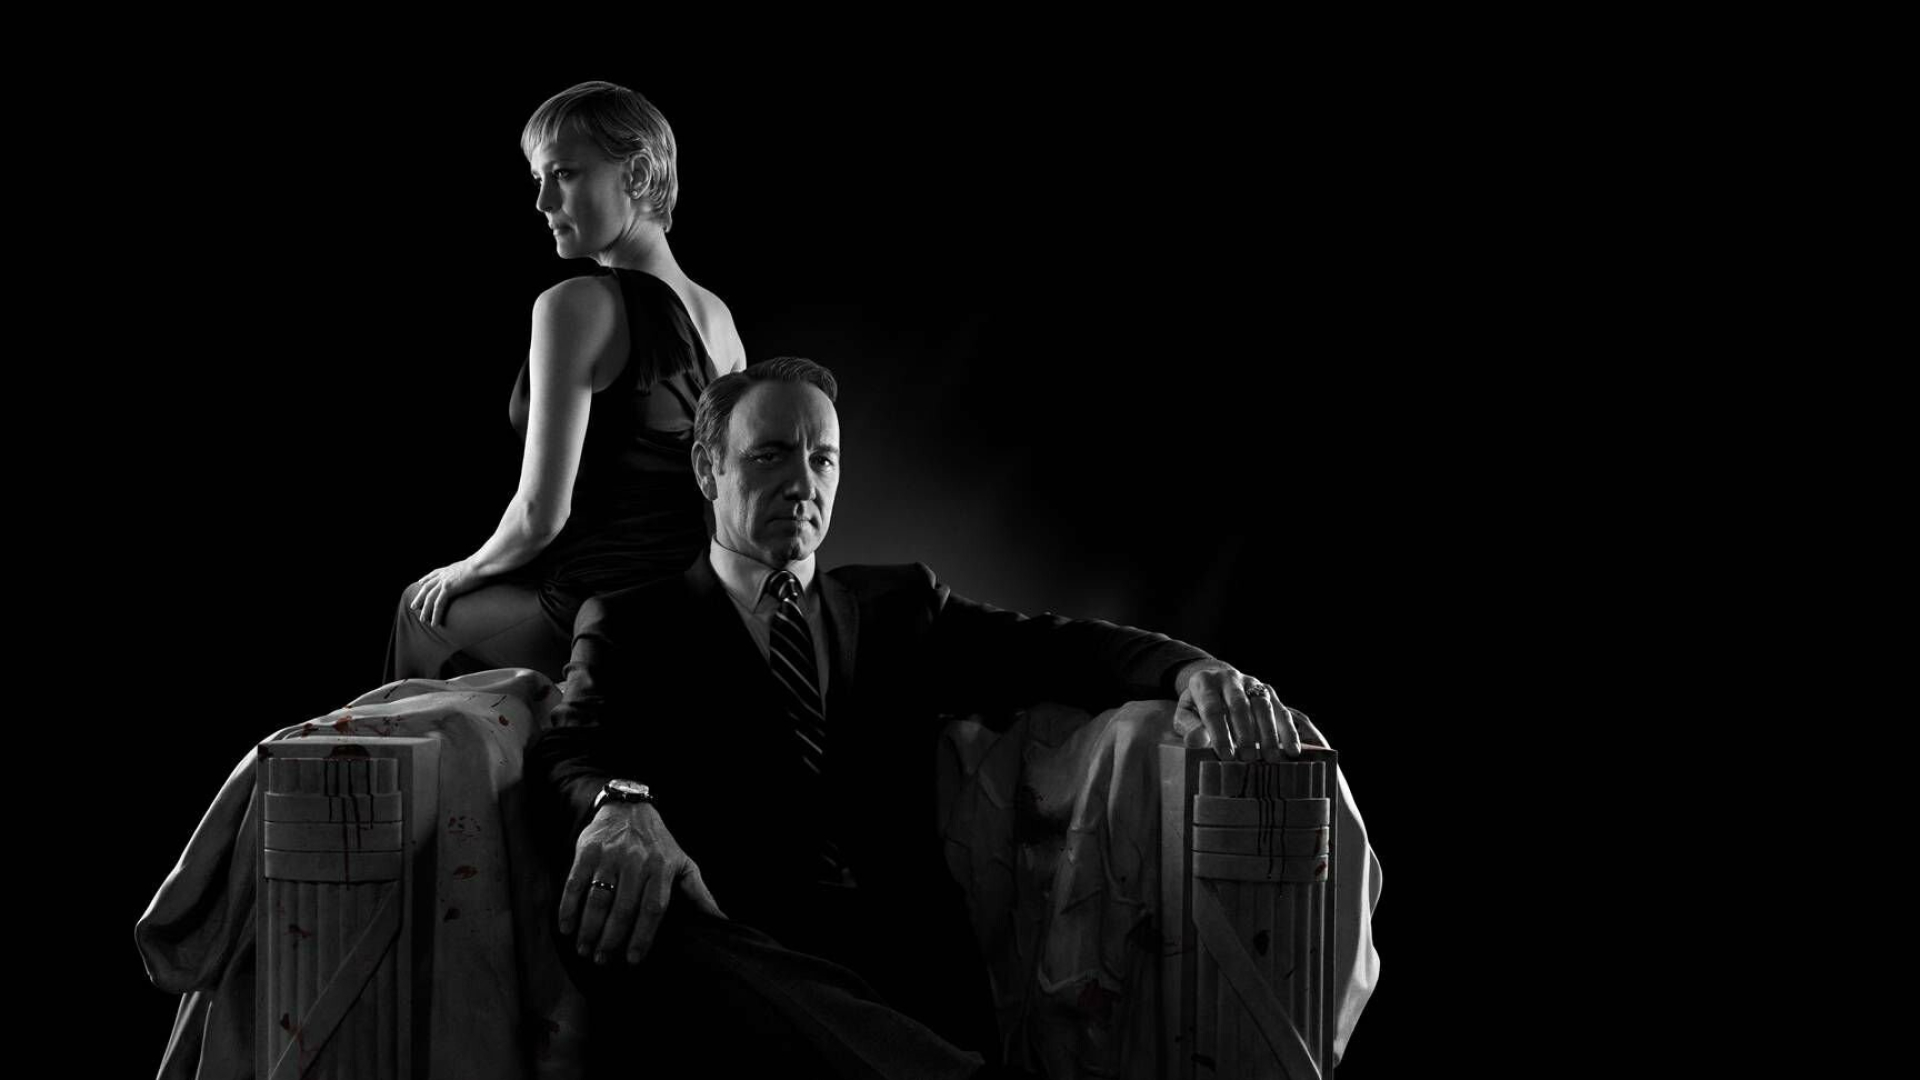 House of Cards: Political drama series, Kevin Spacey and Robin Wright. 1920x1080 Full HD Background.